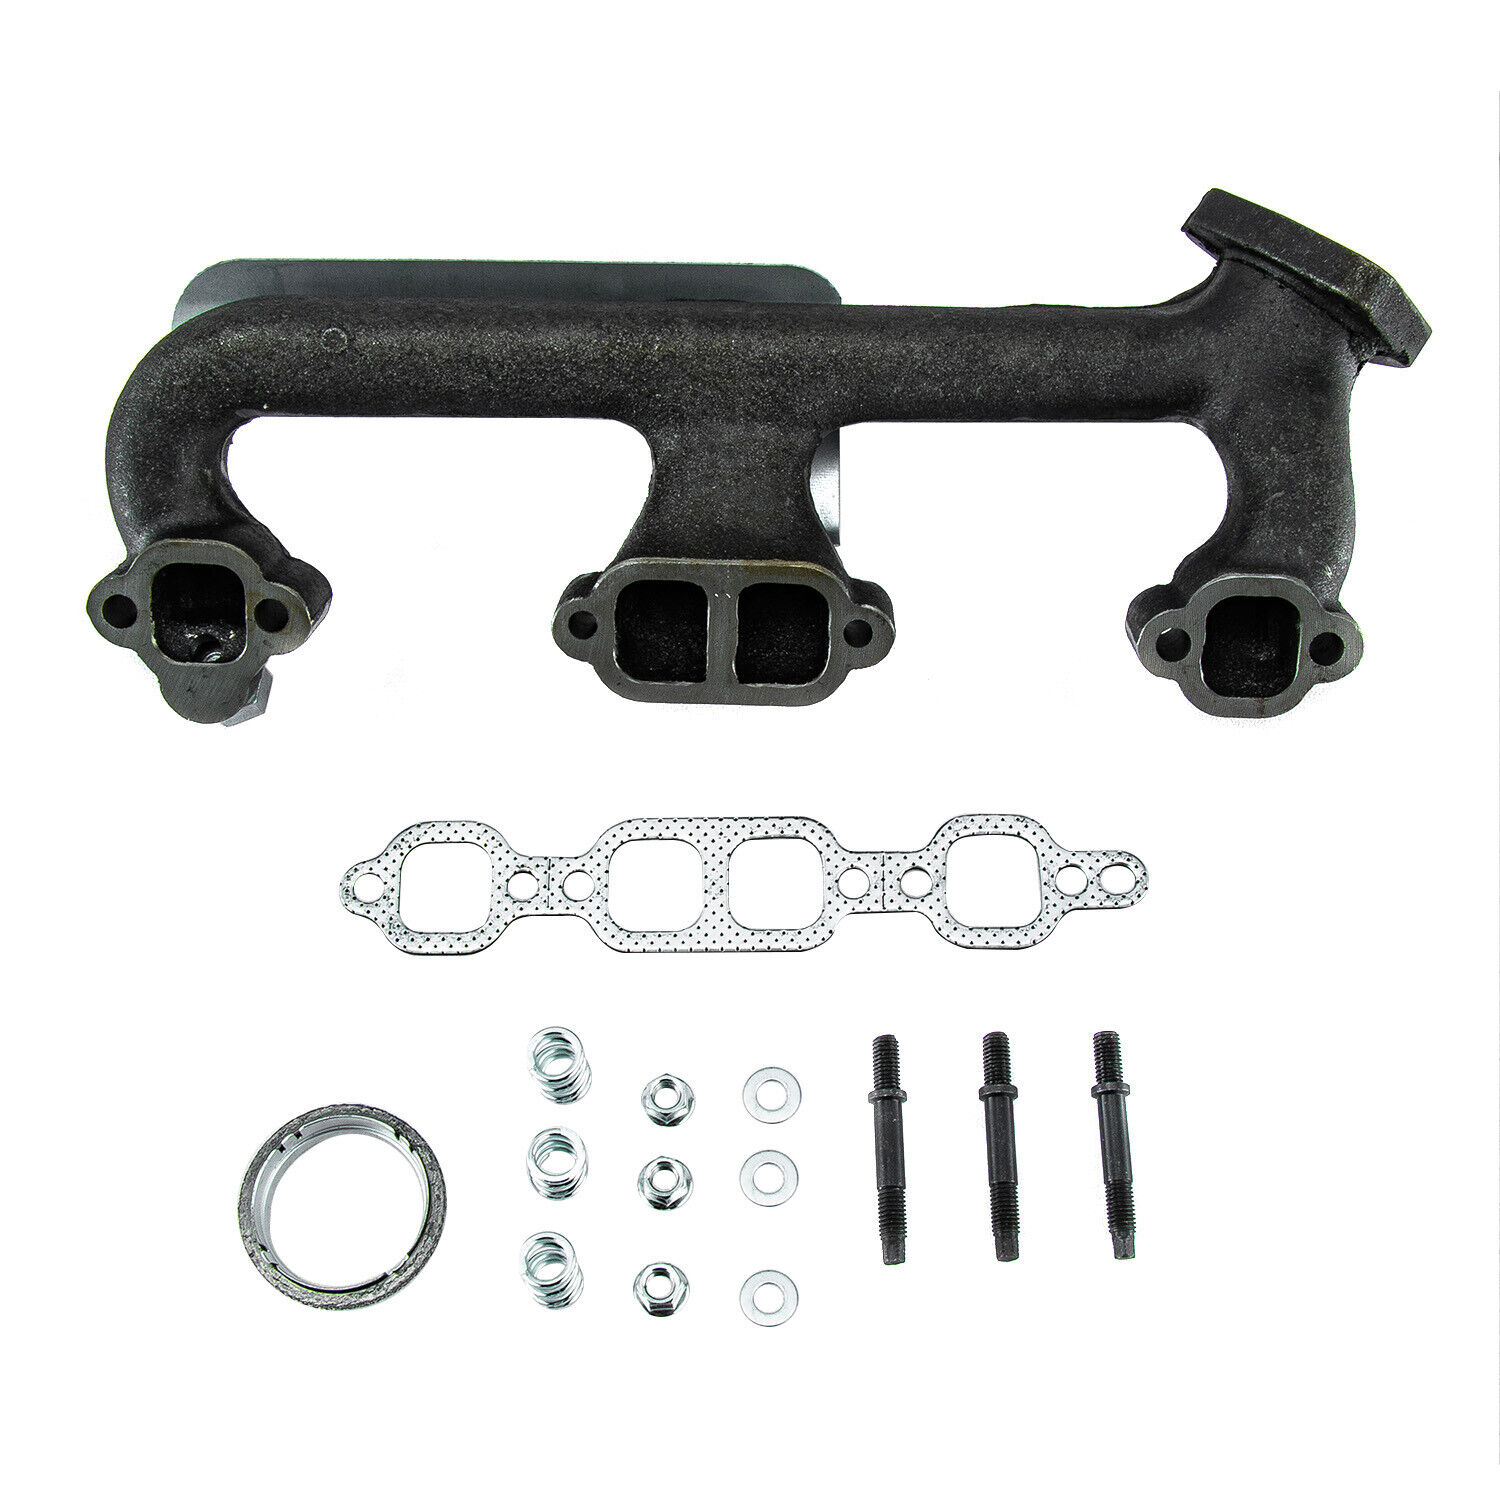 Exhaust Manifold For 1988-95 Chevy GMC C/K 1500 2500 Pickup 350 305 5.0L BB